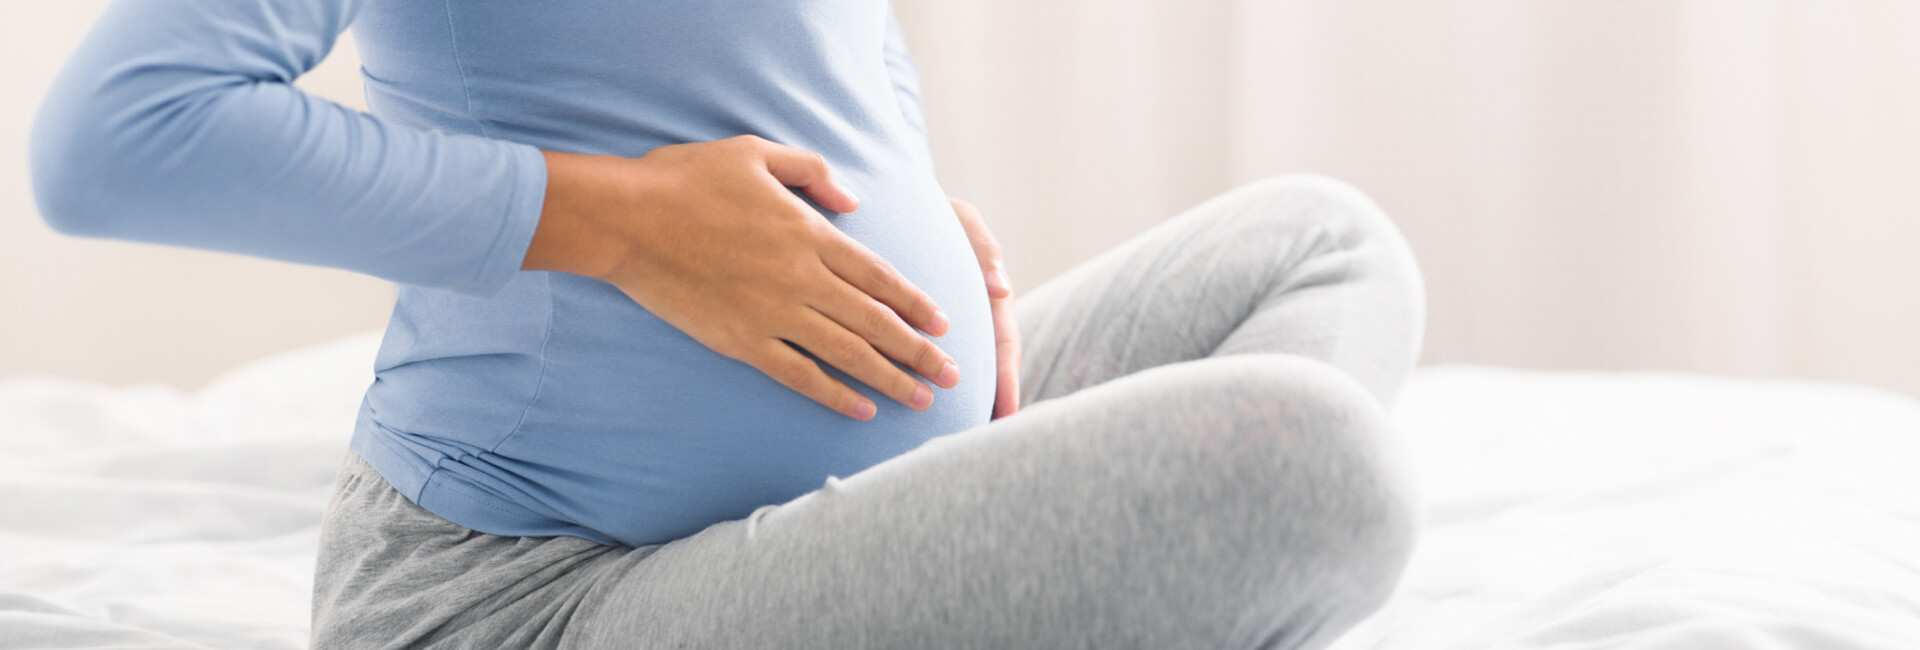 Prenatal Massage: Everything You Need to Know